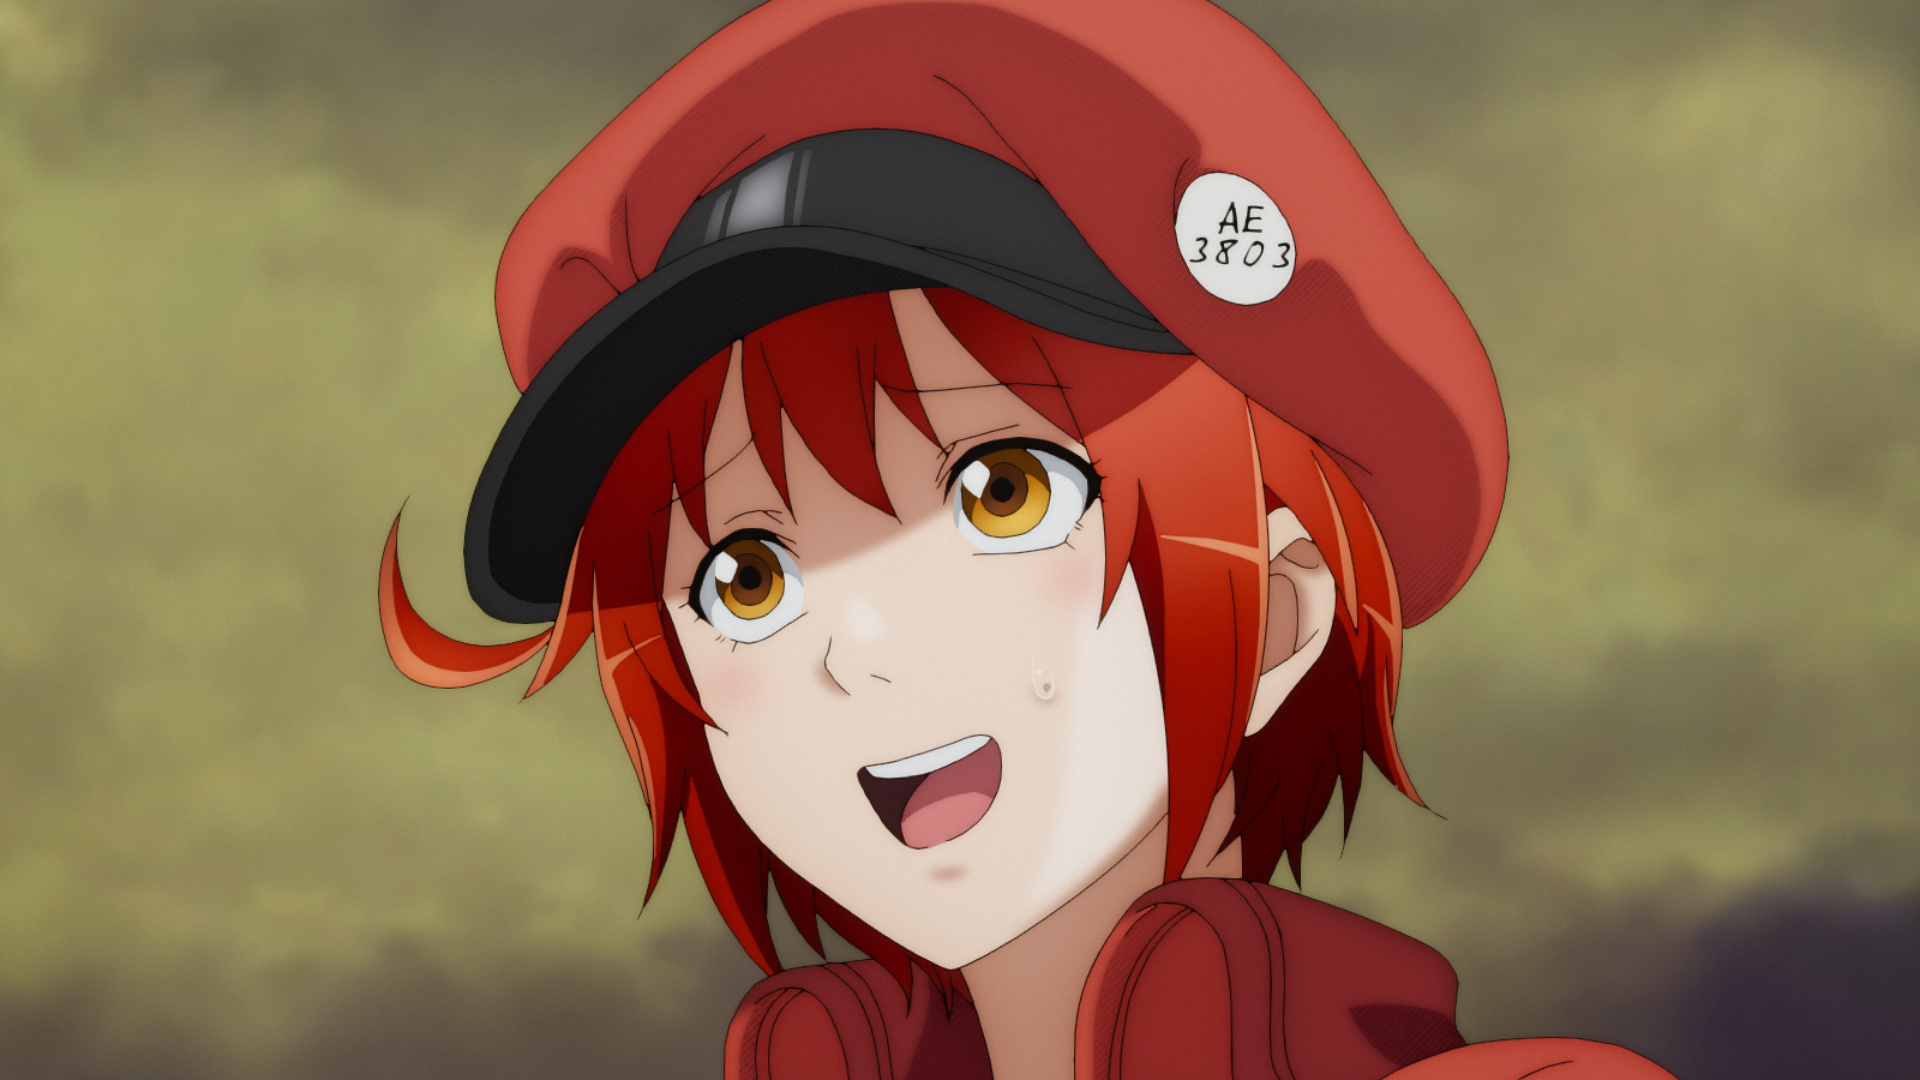 Red Blood Cell from Cells at Work!